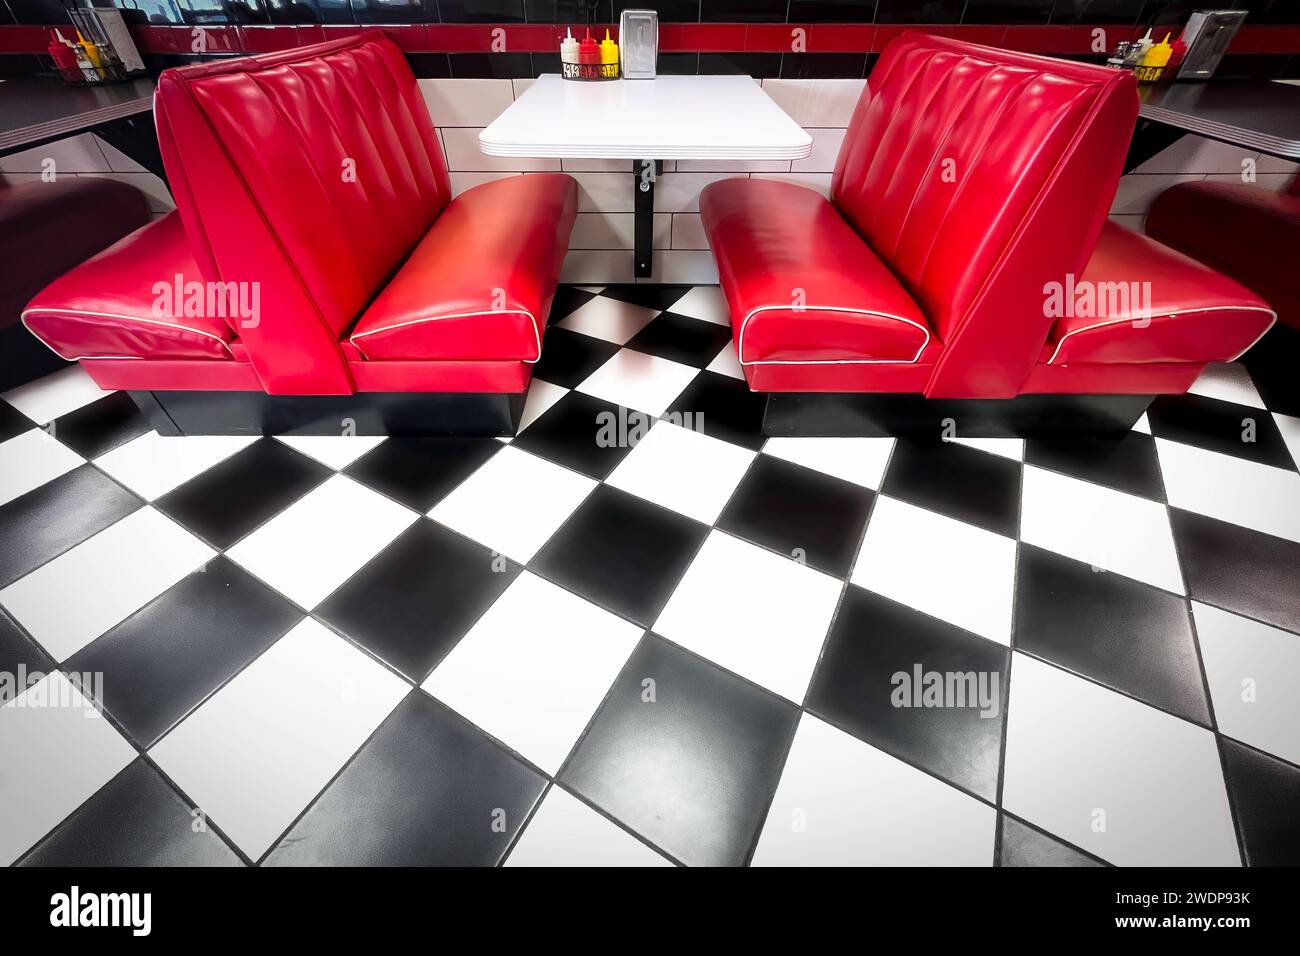 The checkered tile floor and red seats of a retro fifties style diner near El Paso, Texas. Stock Photo